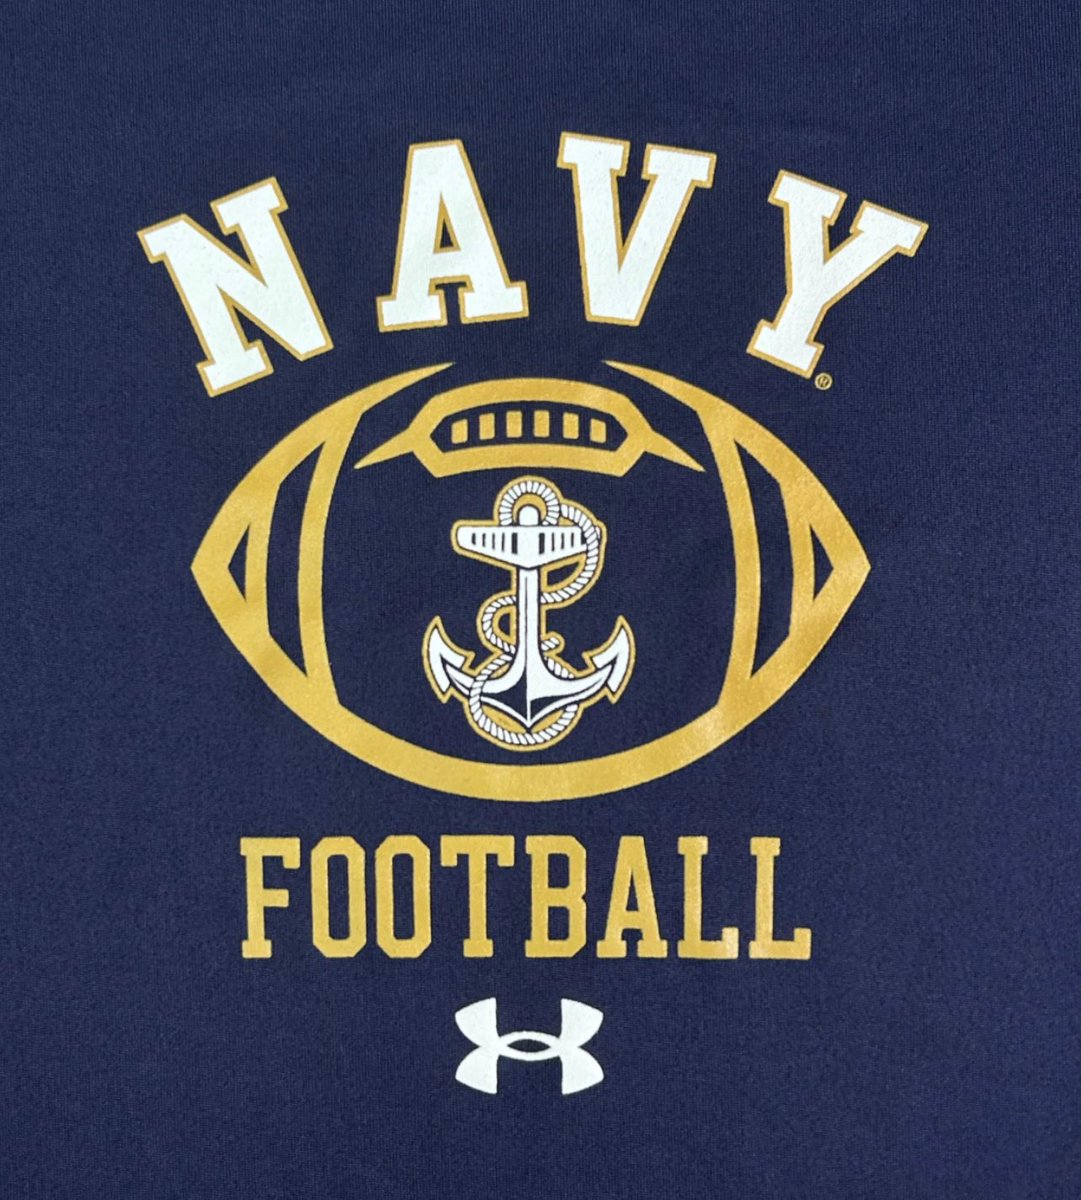 Very grateful to receive an offer from @NavyFB! Thank you @CoachEricLewis @_CoachNew @CoachJ_Williams and the entire Navy staff for this opportunity. Also thank you to Coach Mazi and @MCAthletics. Go Navy!